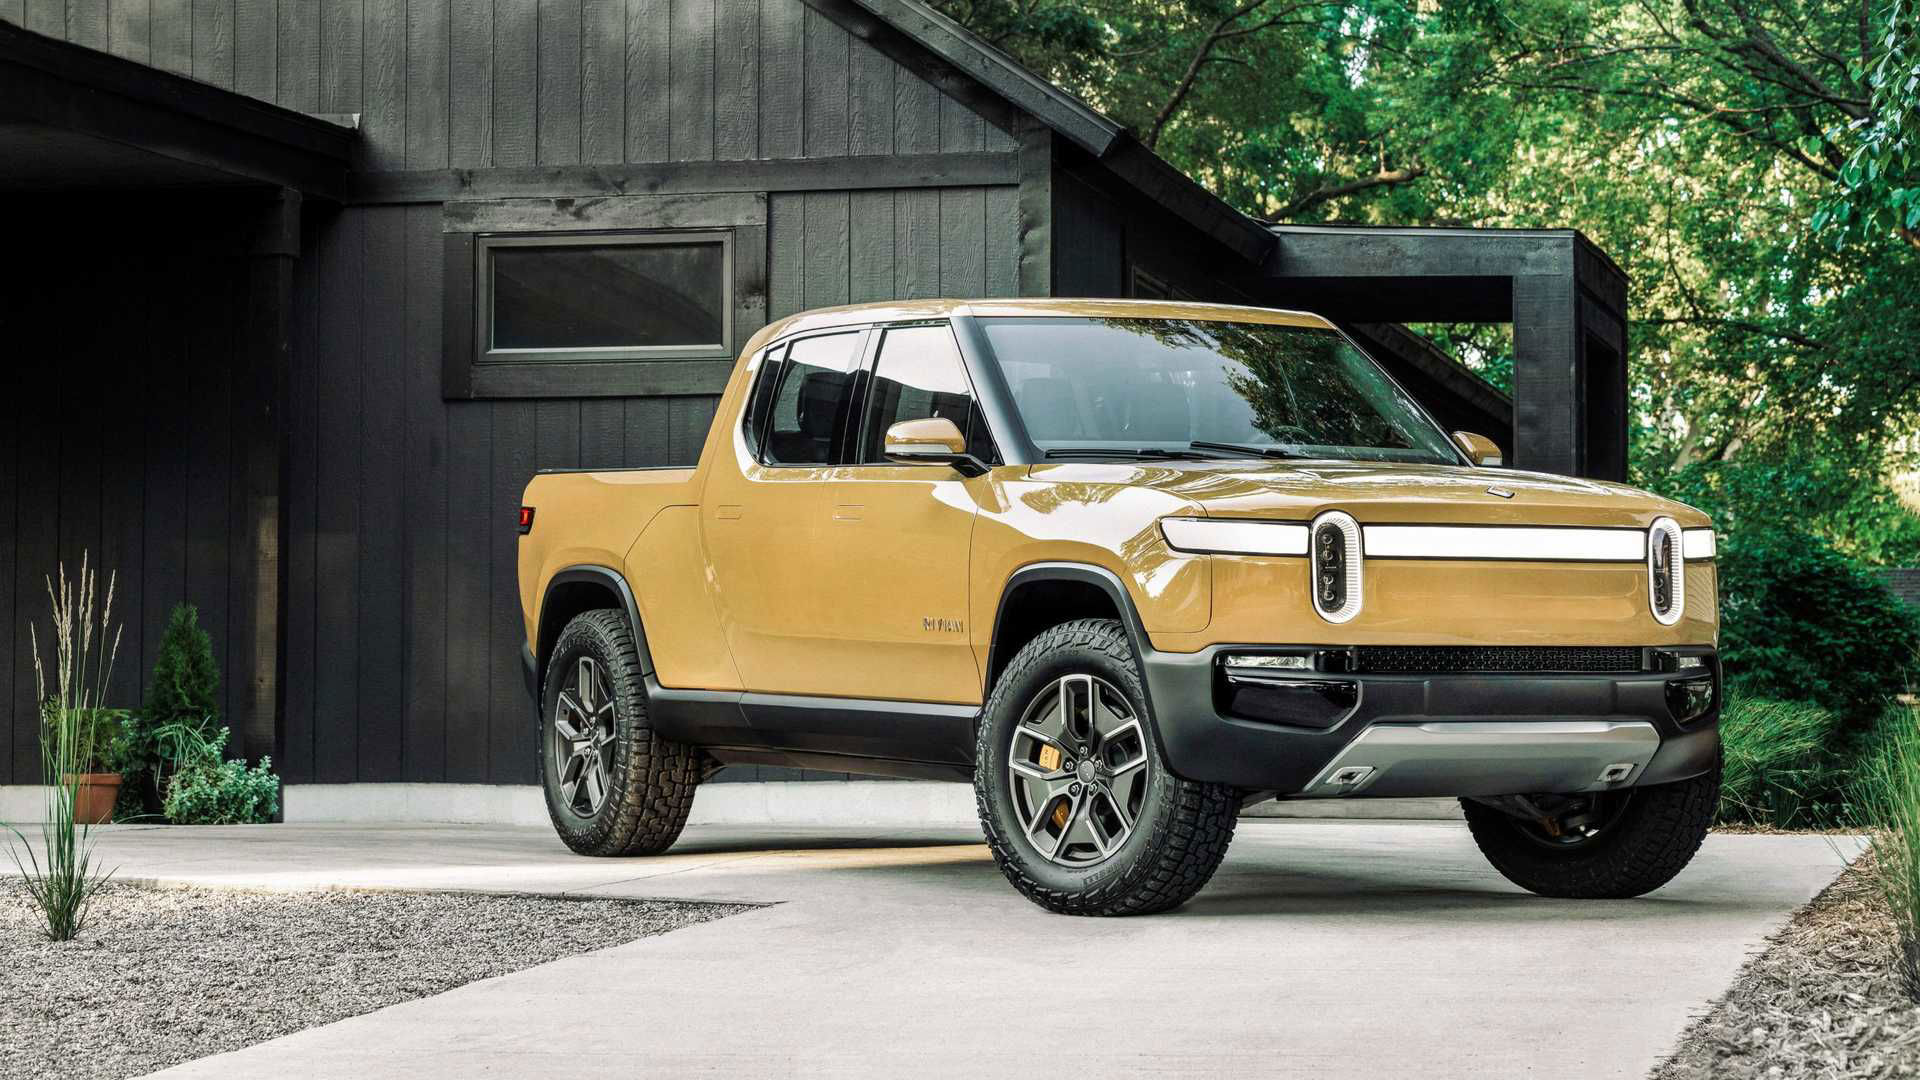 Rivian Electric Truck Maker Sued By Shareholder For Recent Price Shifts